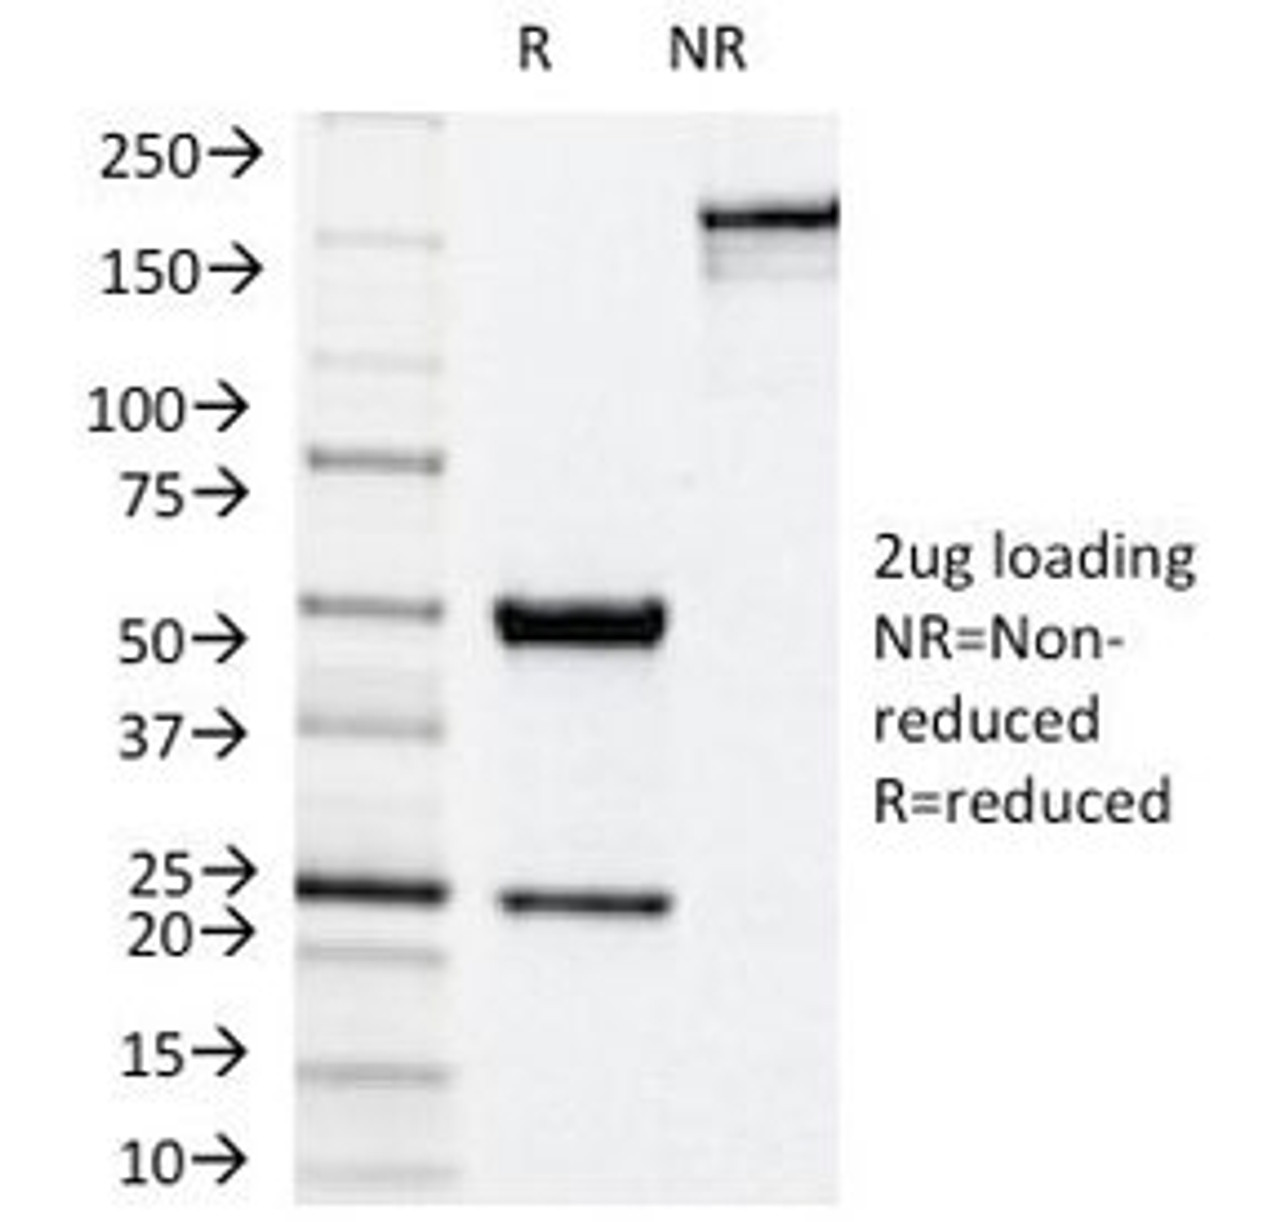 SDS-PAGE Analysis of Purified, BSA-Free NOX4 Antibody (clone NOX4/1245) . Confirmation of Integrity and Purity of the Antibody.